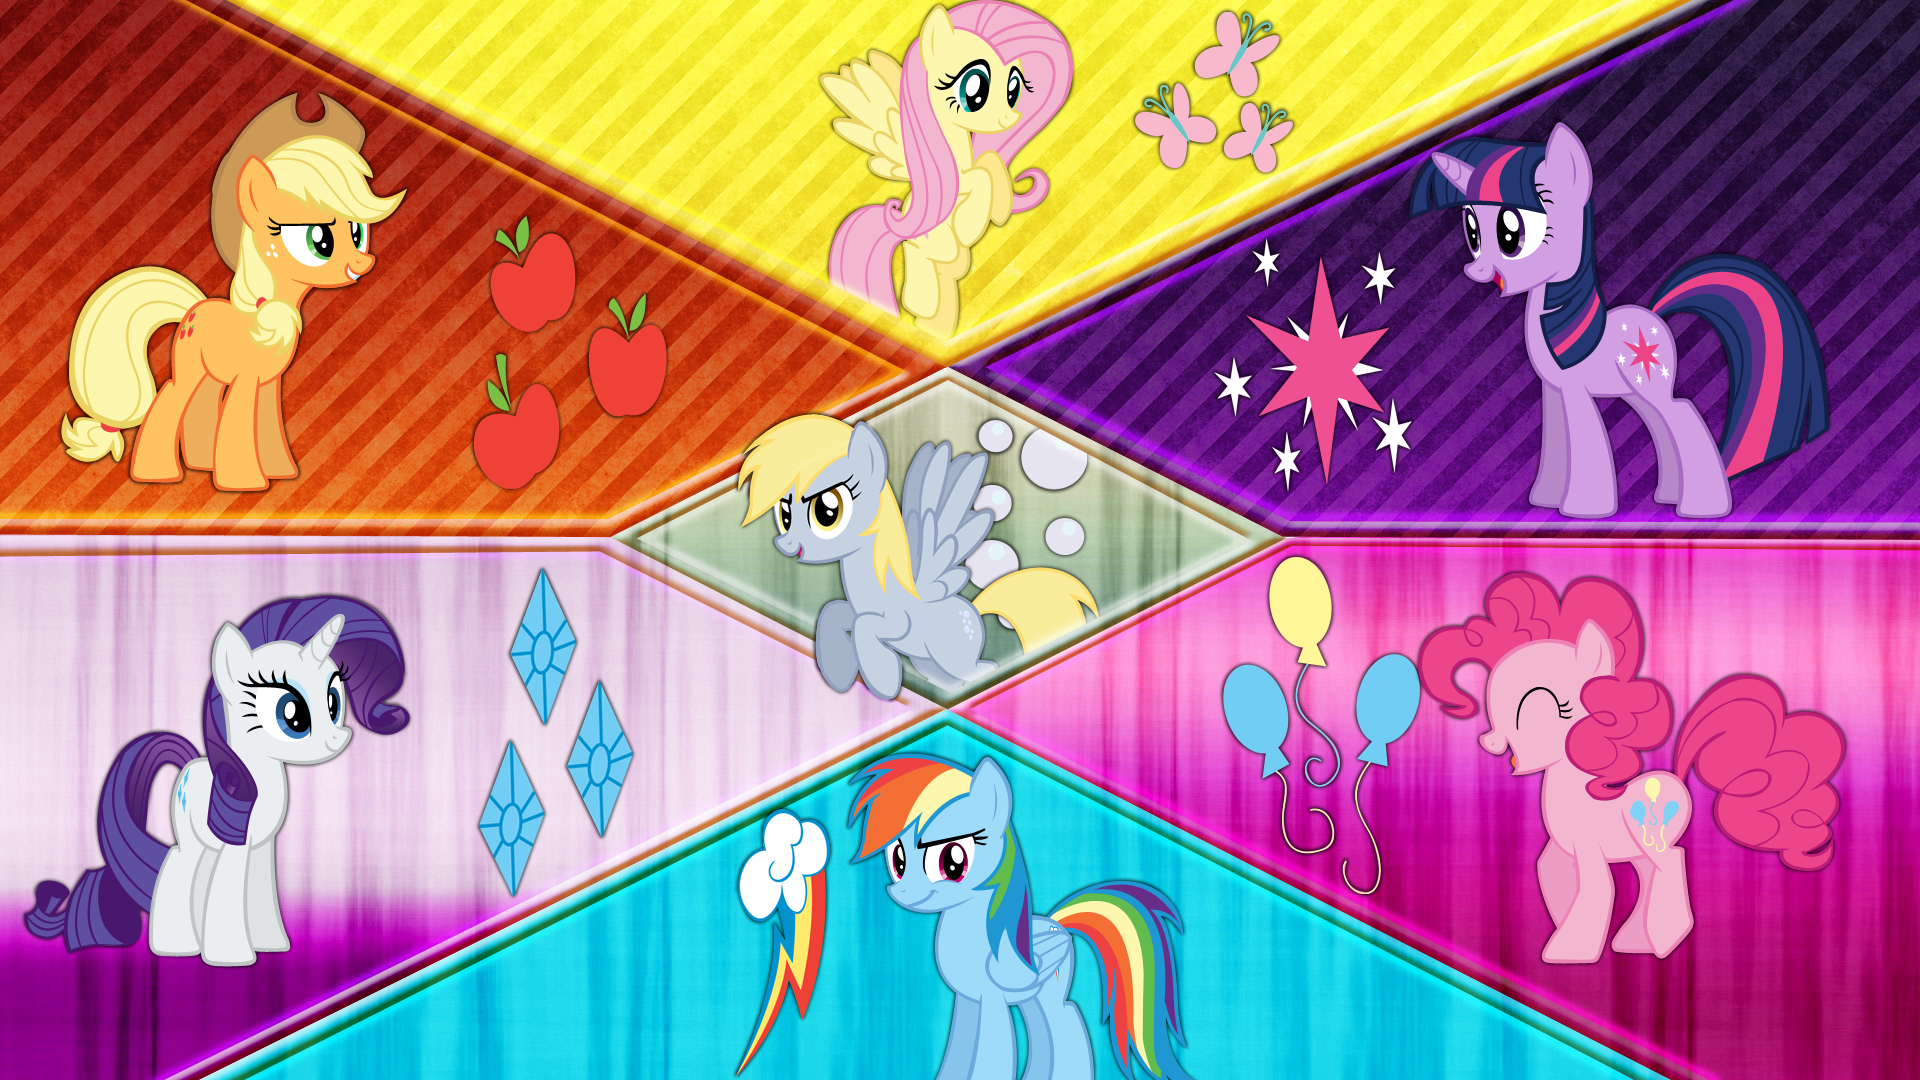 Mane 6 Wallpaper + derpy by BlackGryph0n, brezals and TheMedic22